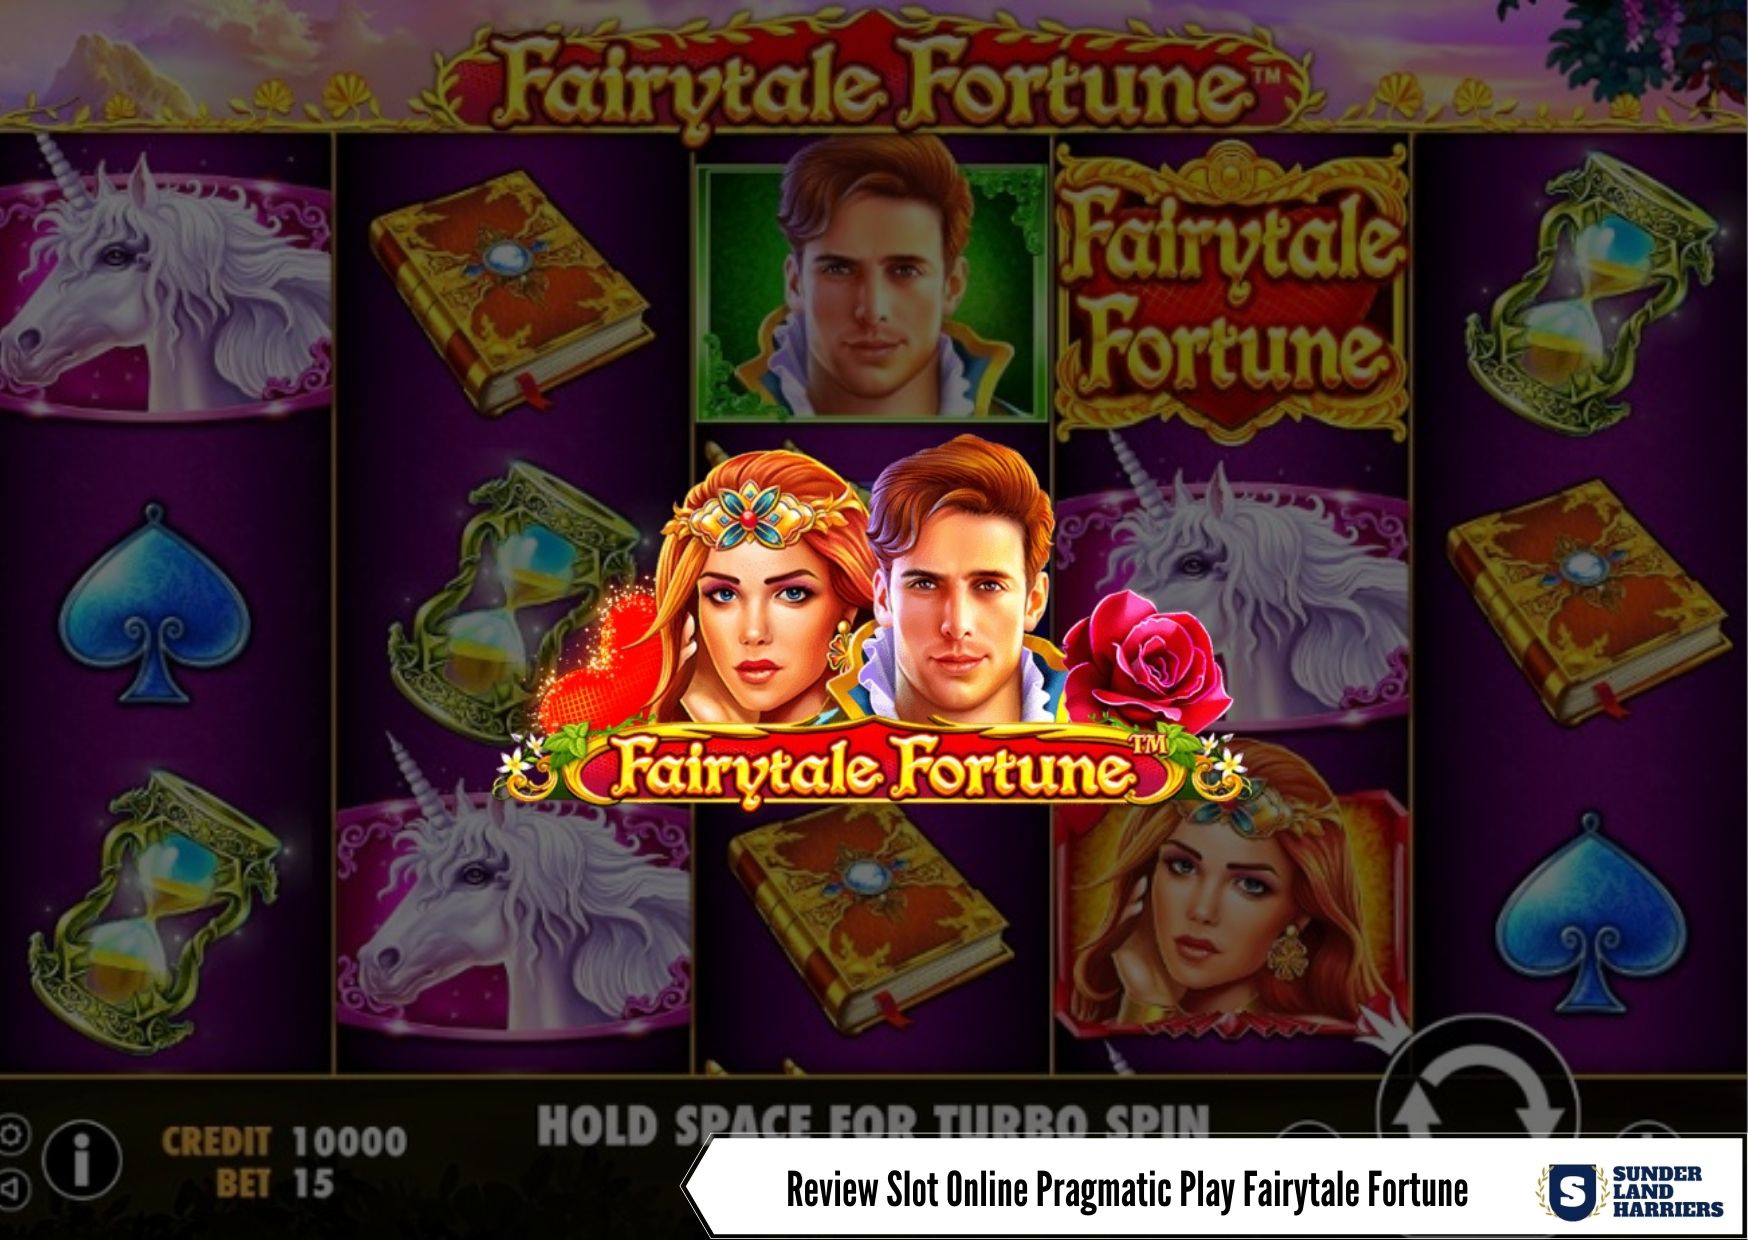 Review Slot Online Pragmatic Play Fairytale Fortune